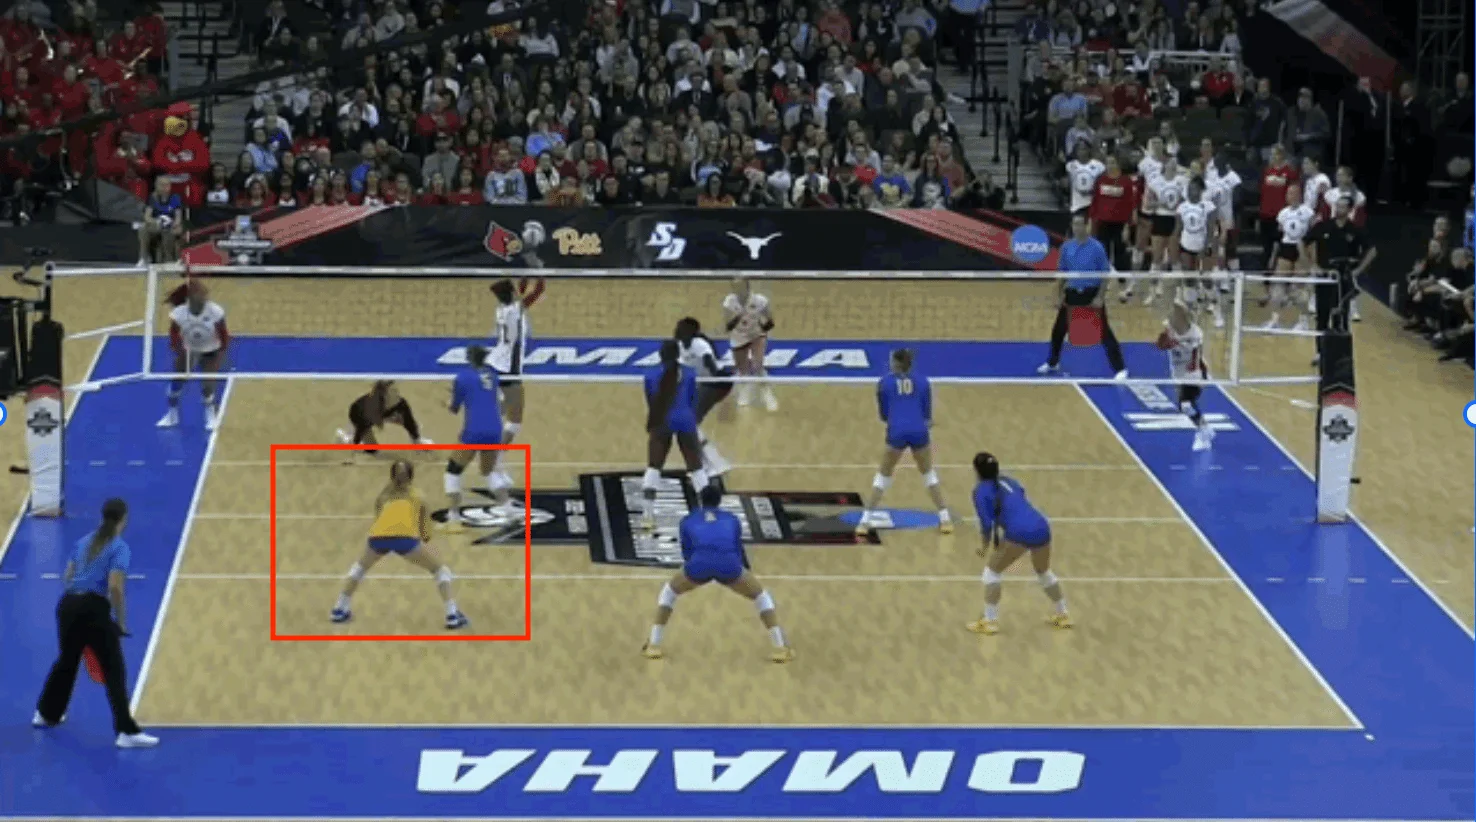 the libero is playing in the left back position in a volleyball game